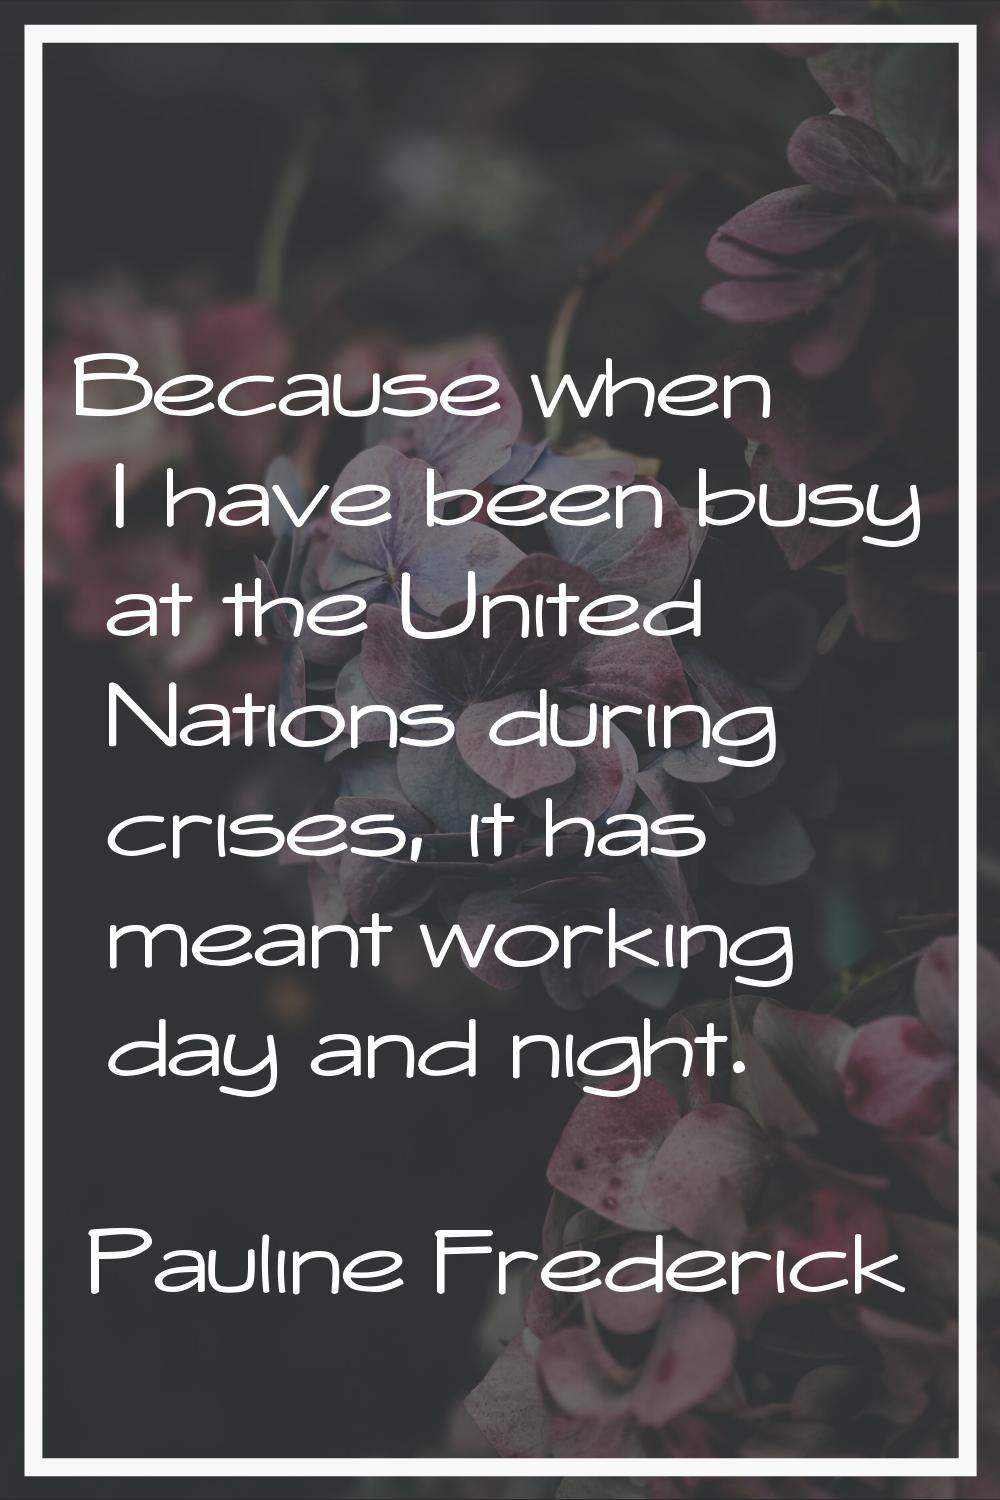 Because when I have been busy at the United Nations during crises, it has meant working day and nig